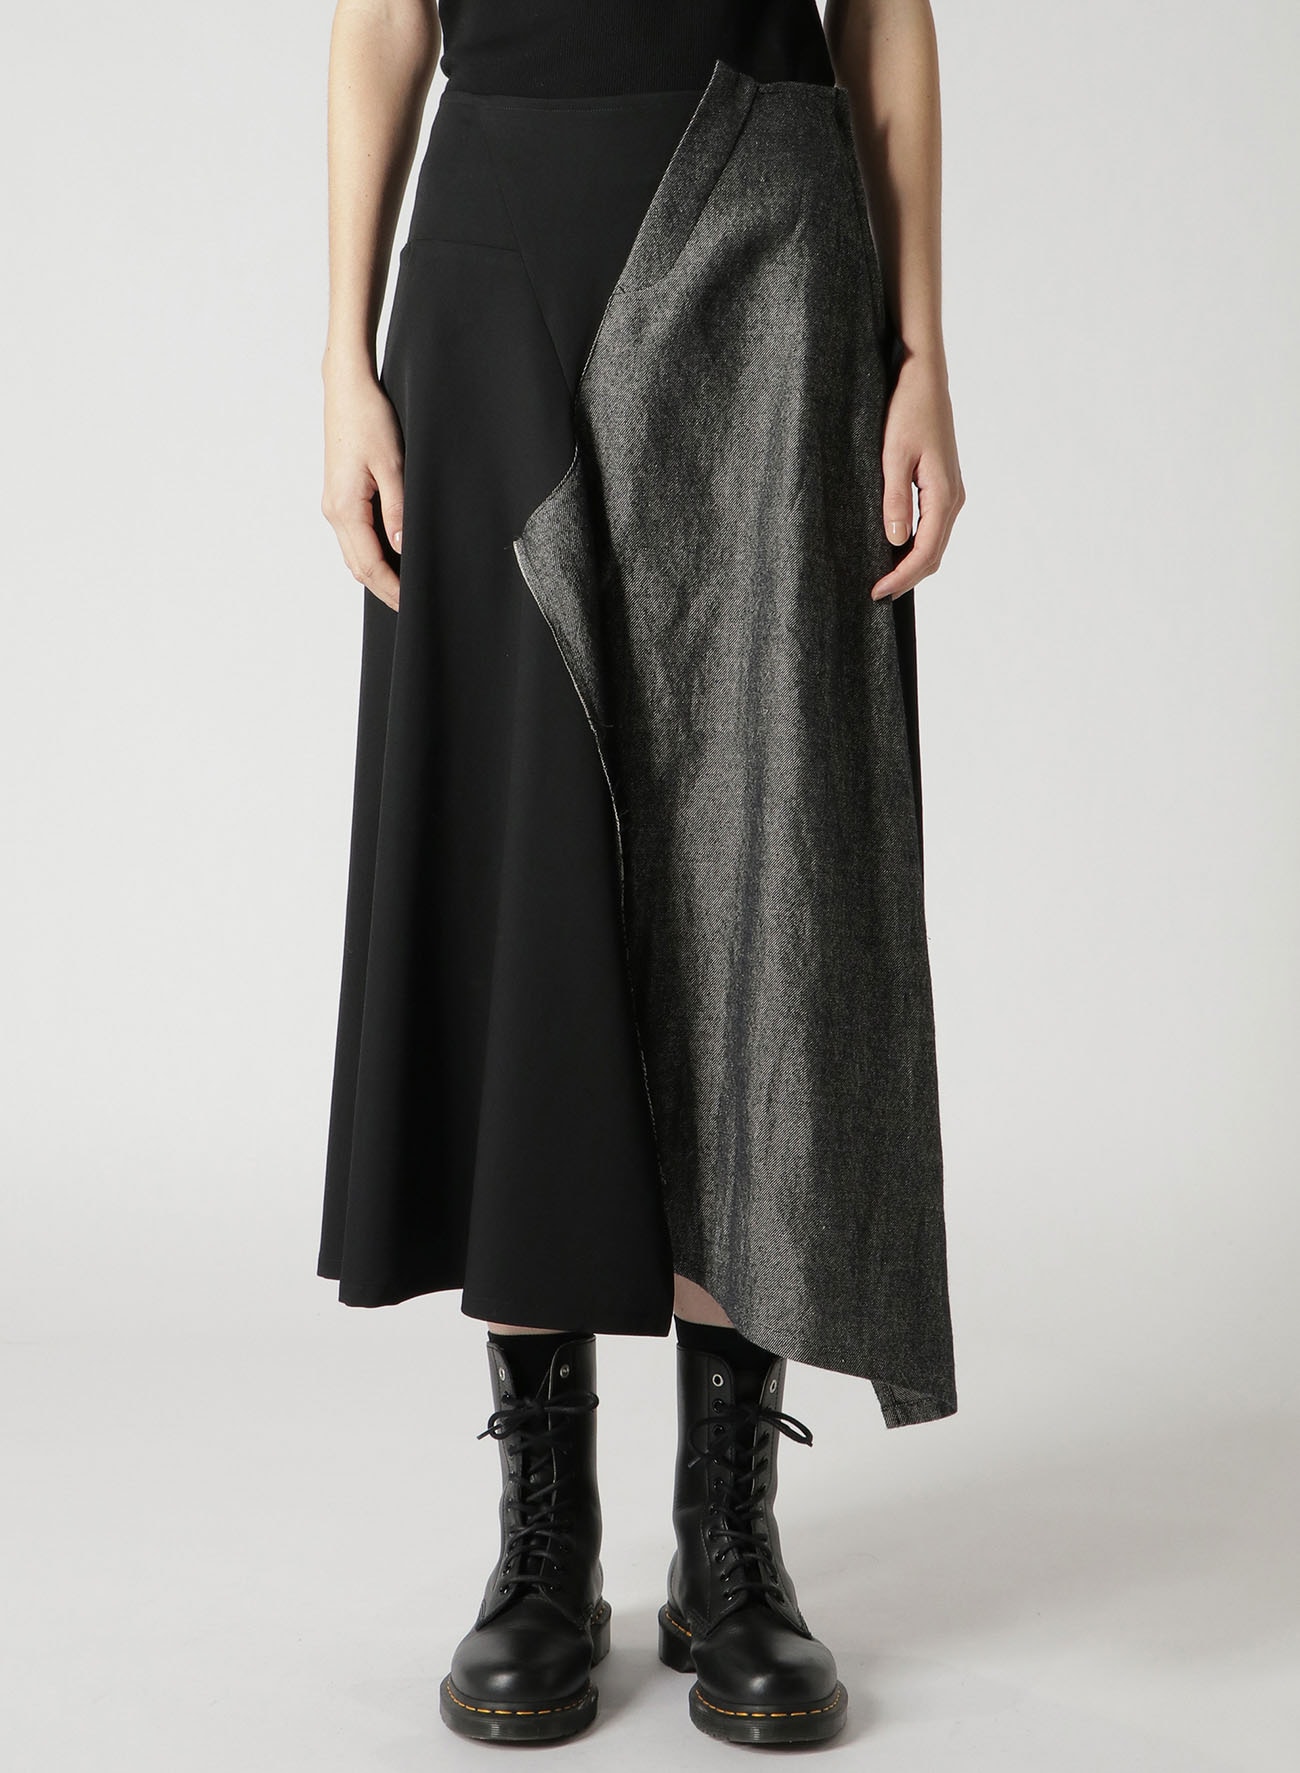 WOOL GABARDINE FLARED SKIRT WITH GUSSETS(XS Black): Y's｜THE SHOP